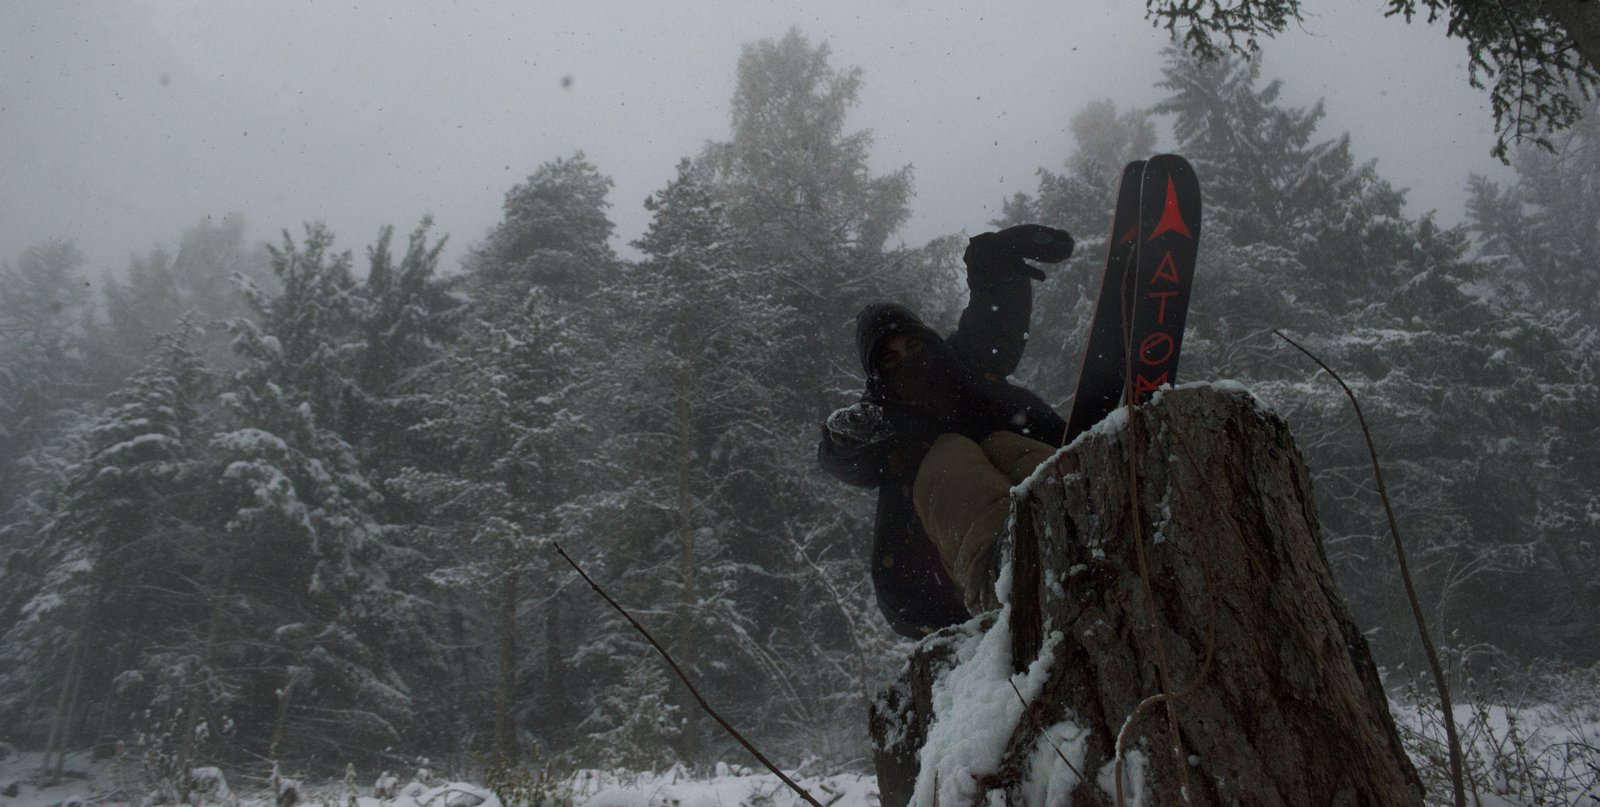 Forest shred